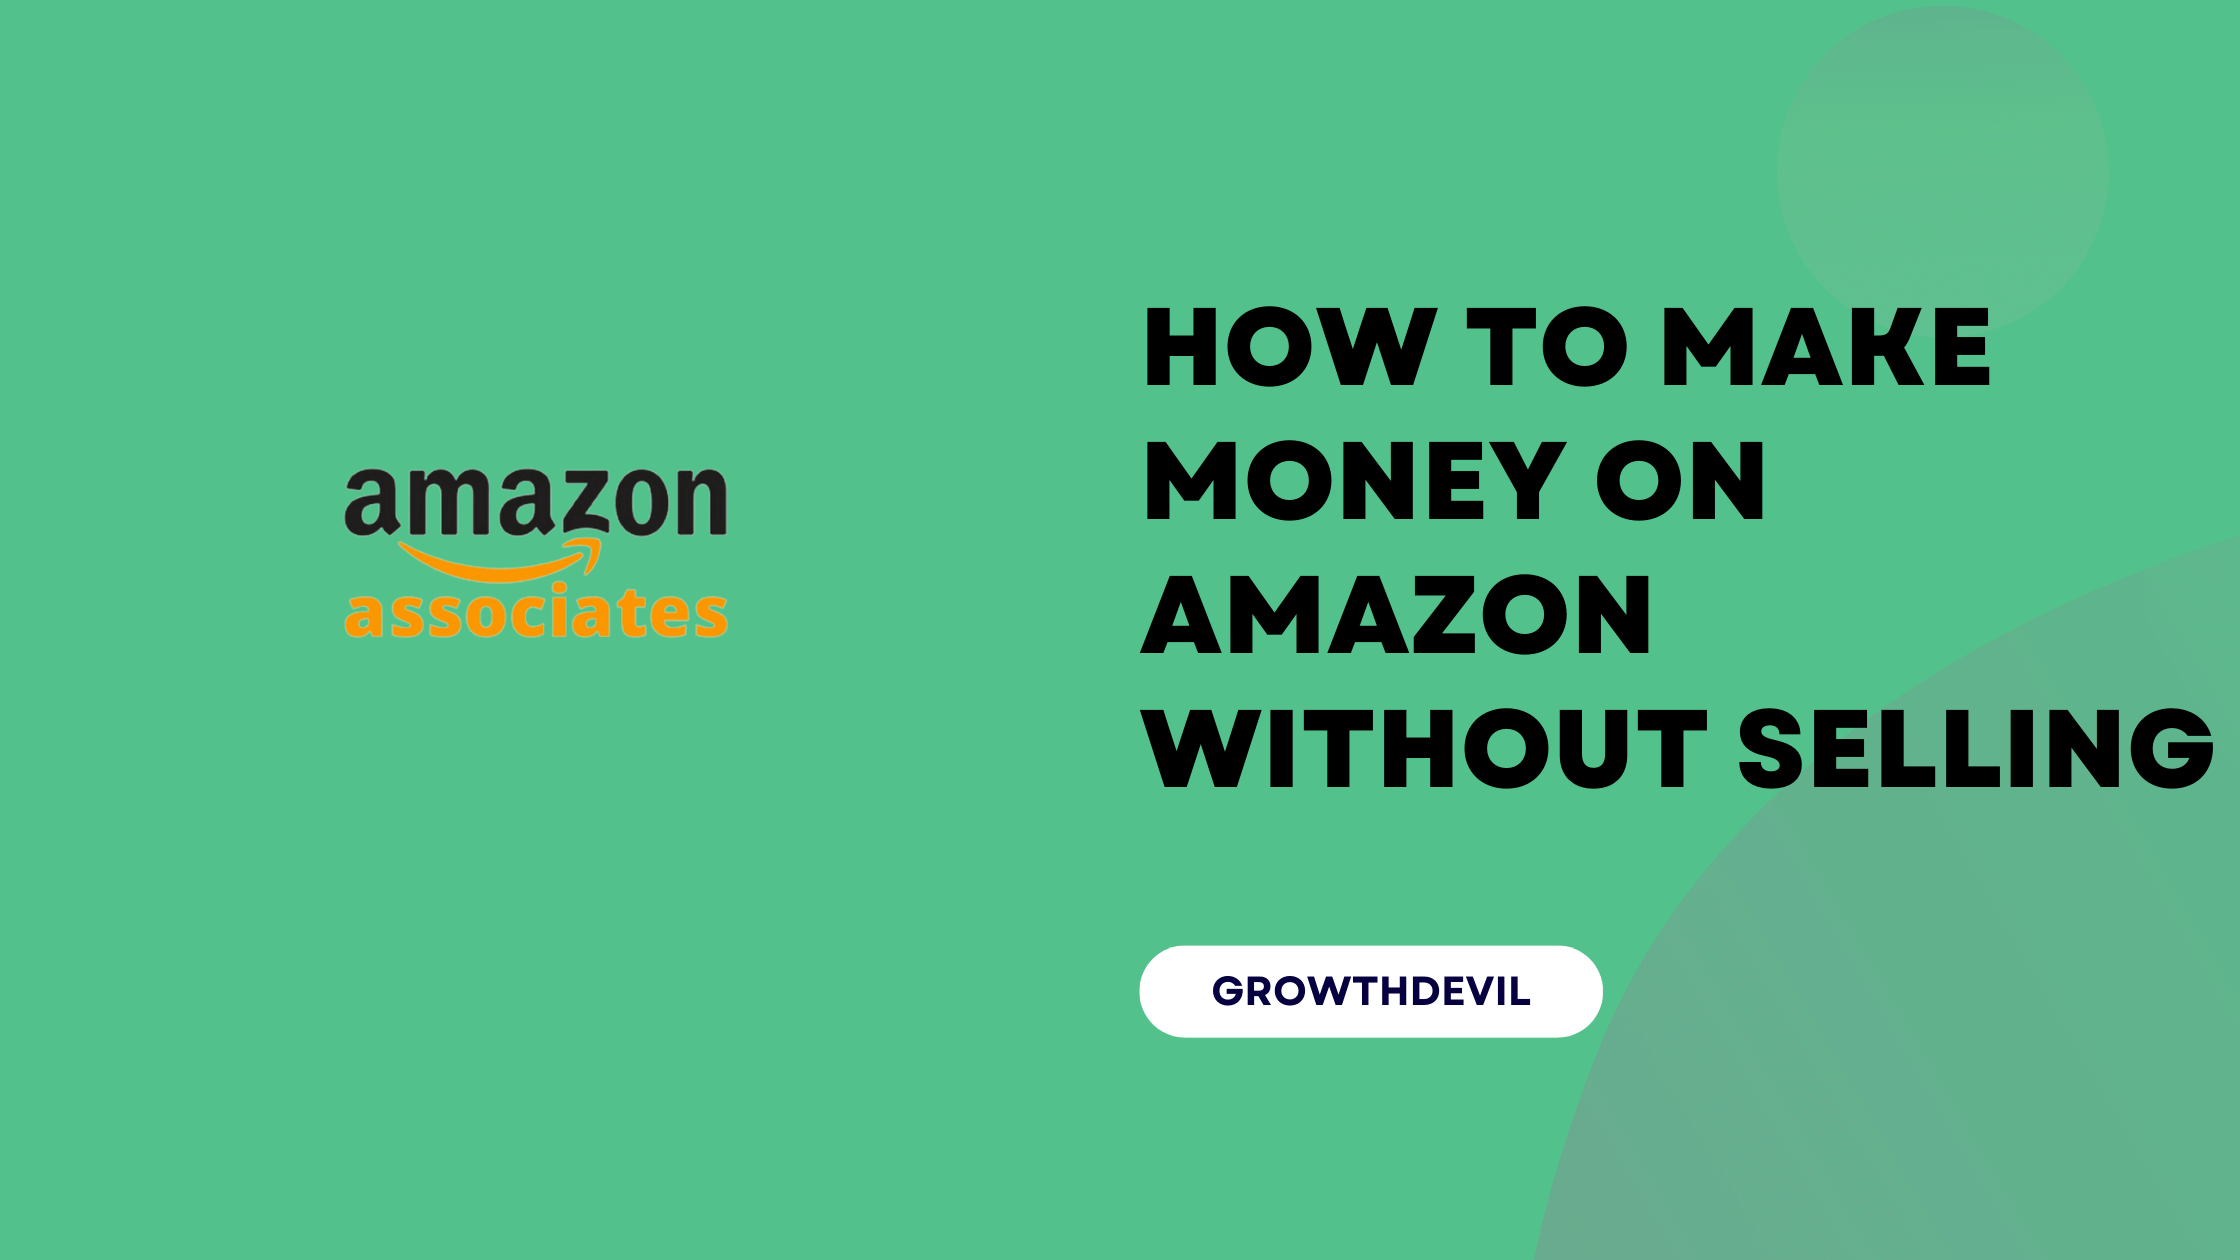 How To Make Money On Amazon Without Selling - GrowthDevil